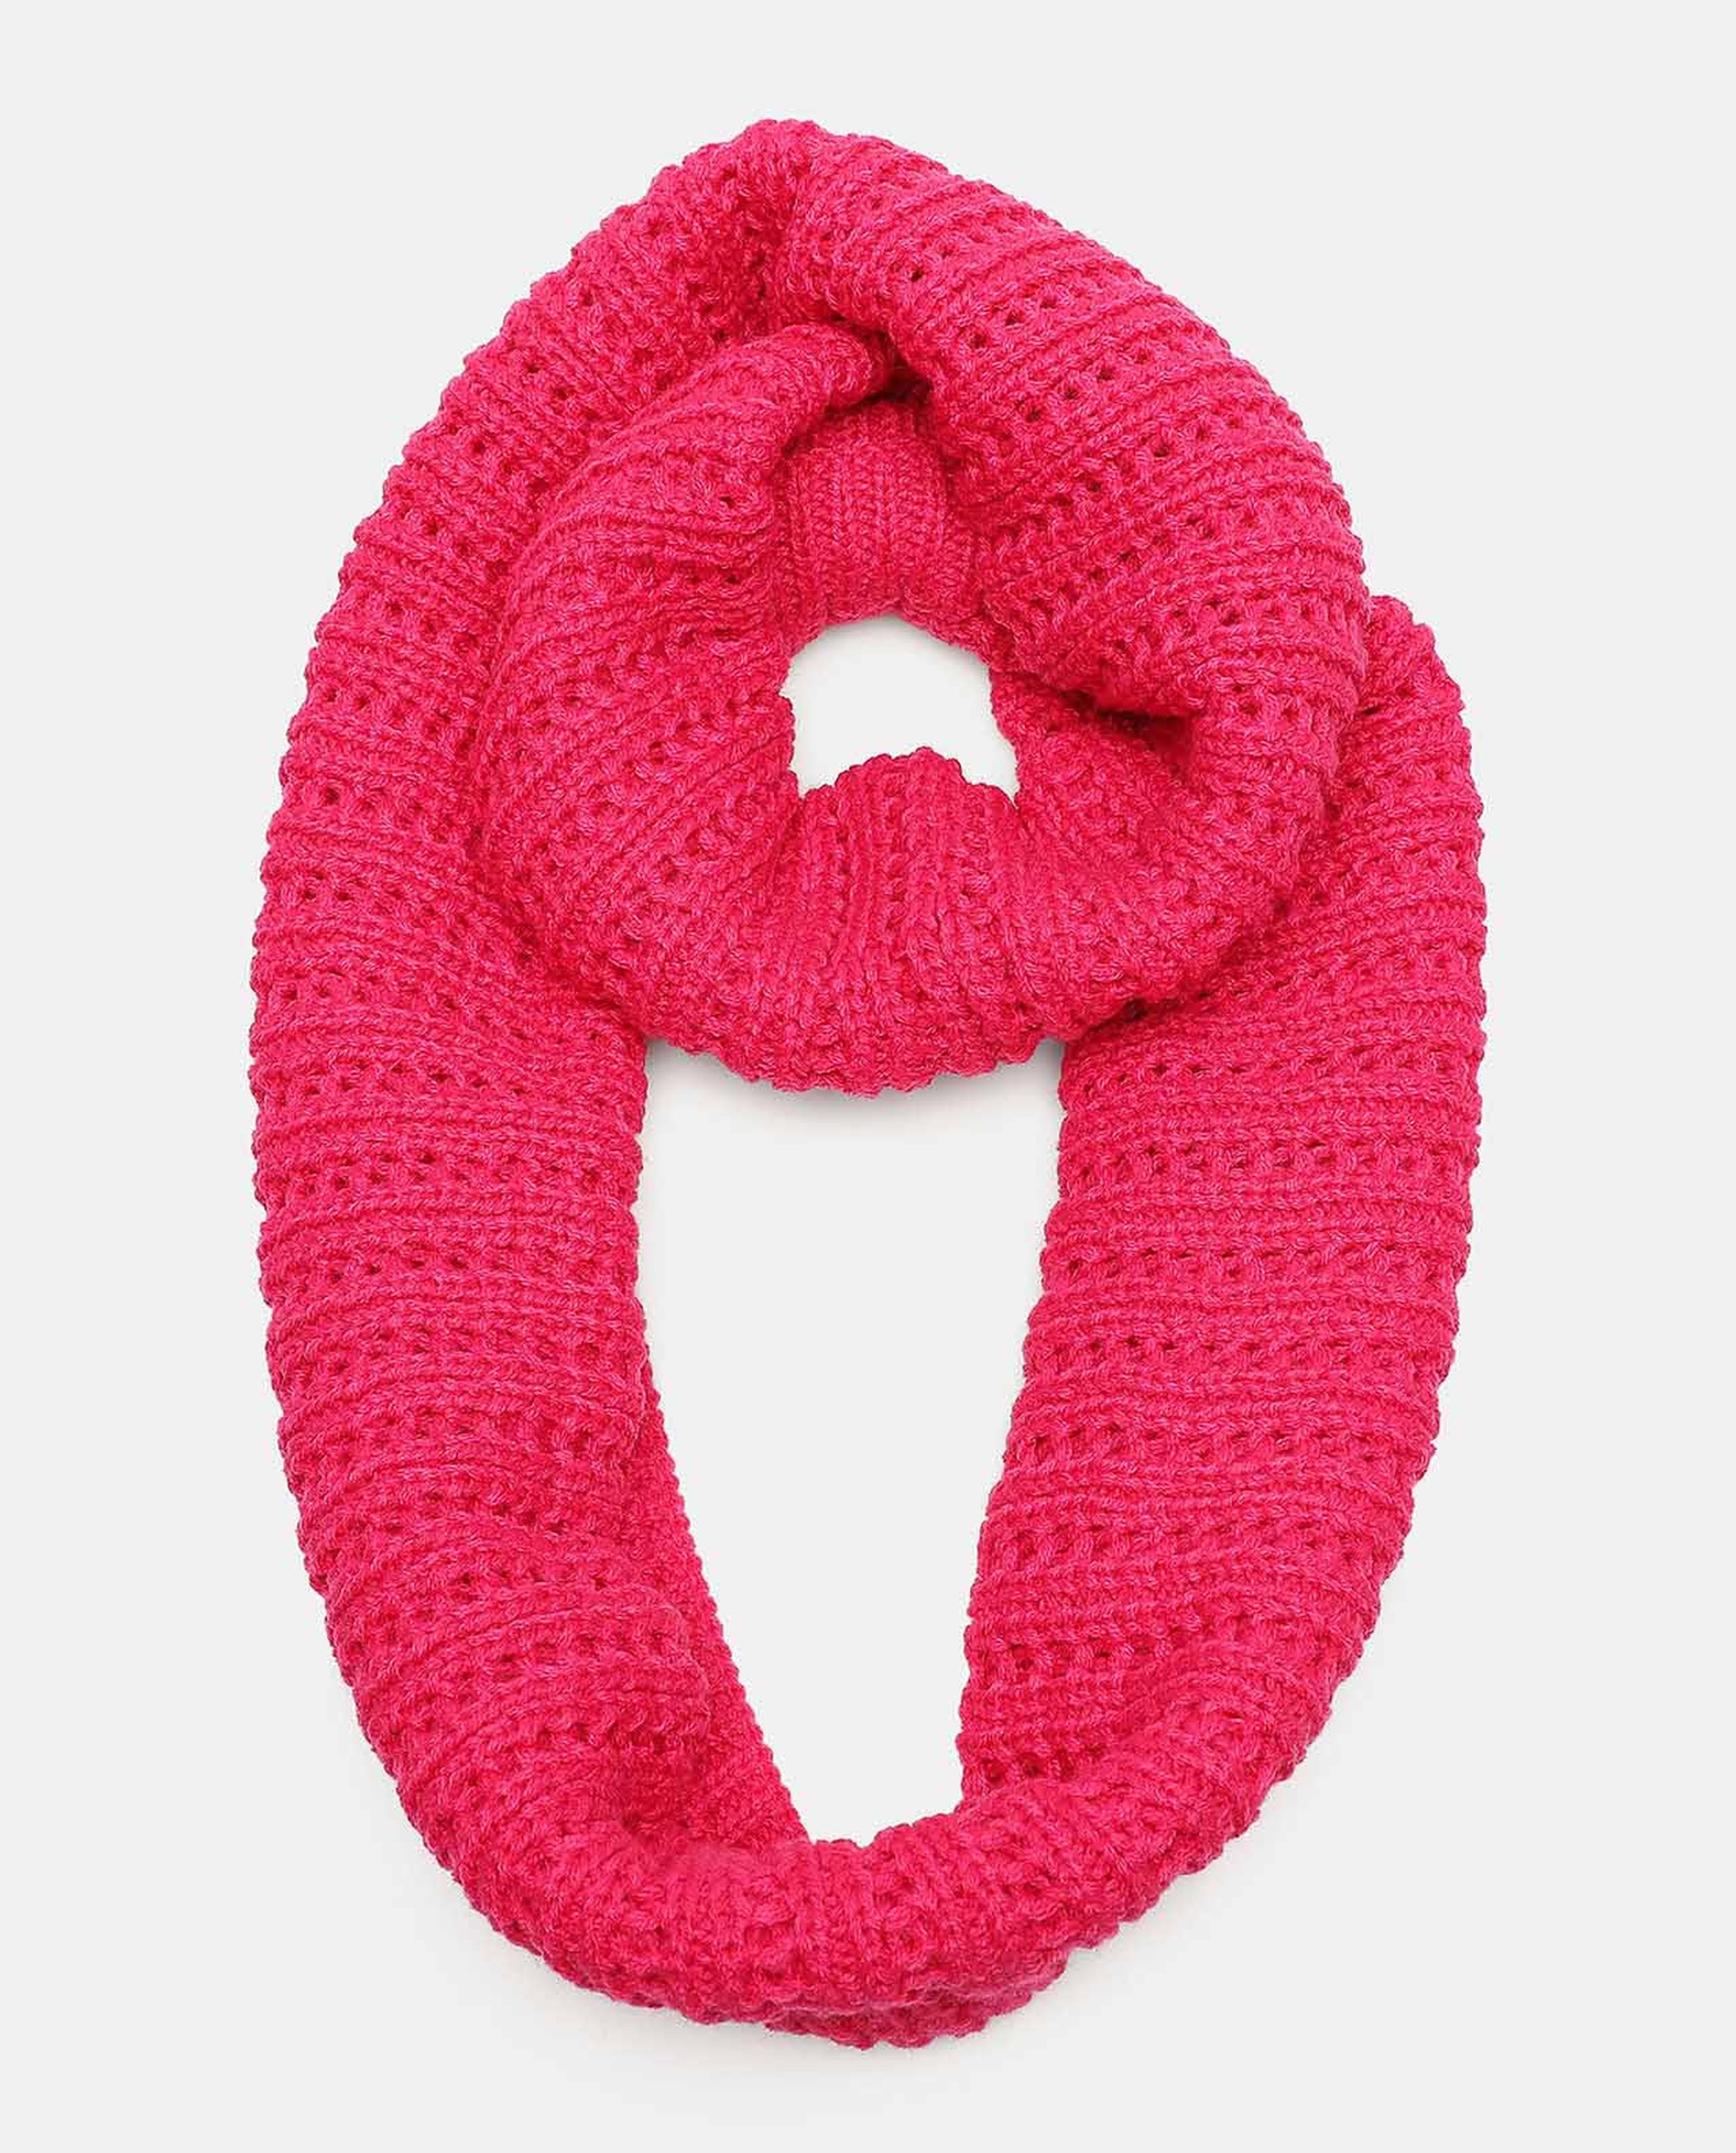 Self Designed Knitted Scarf